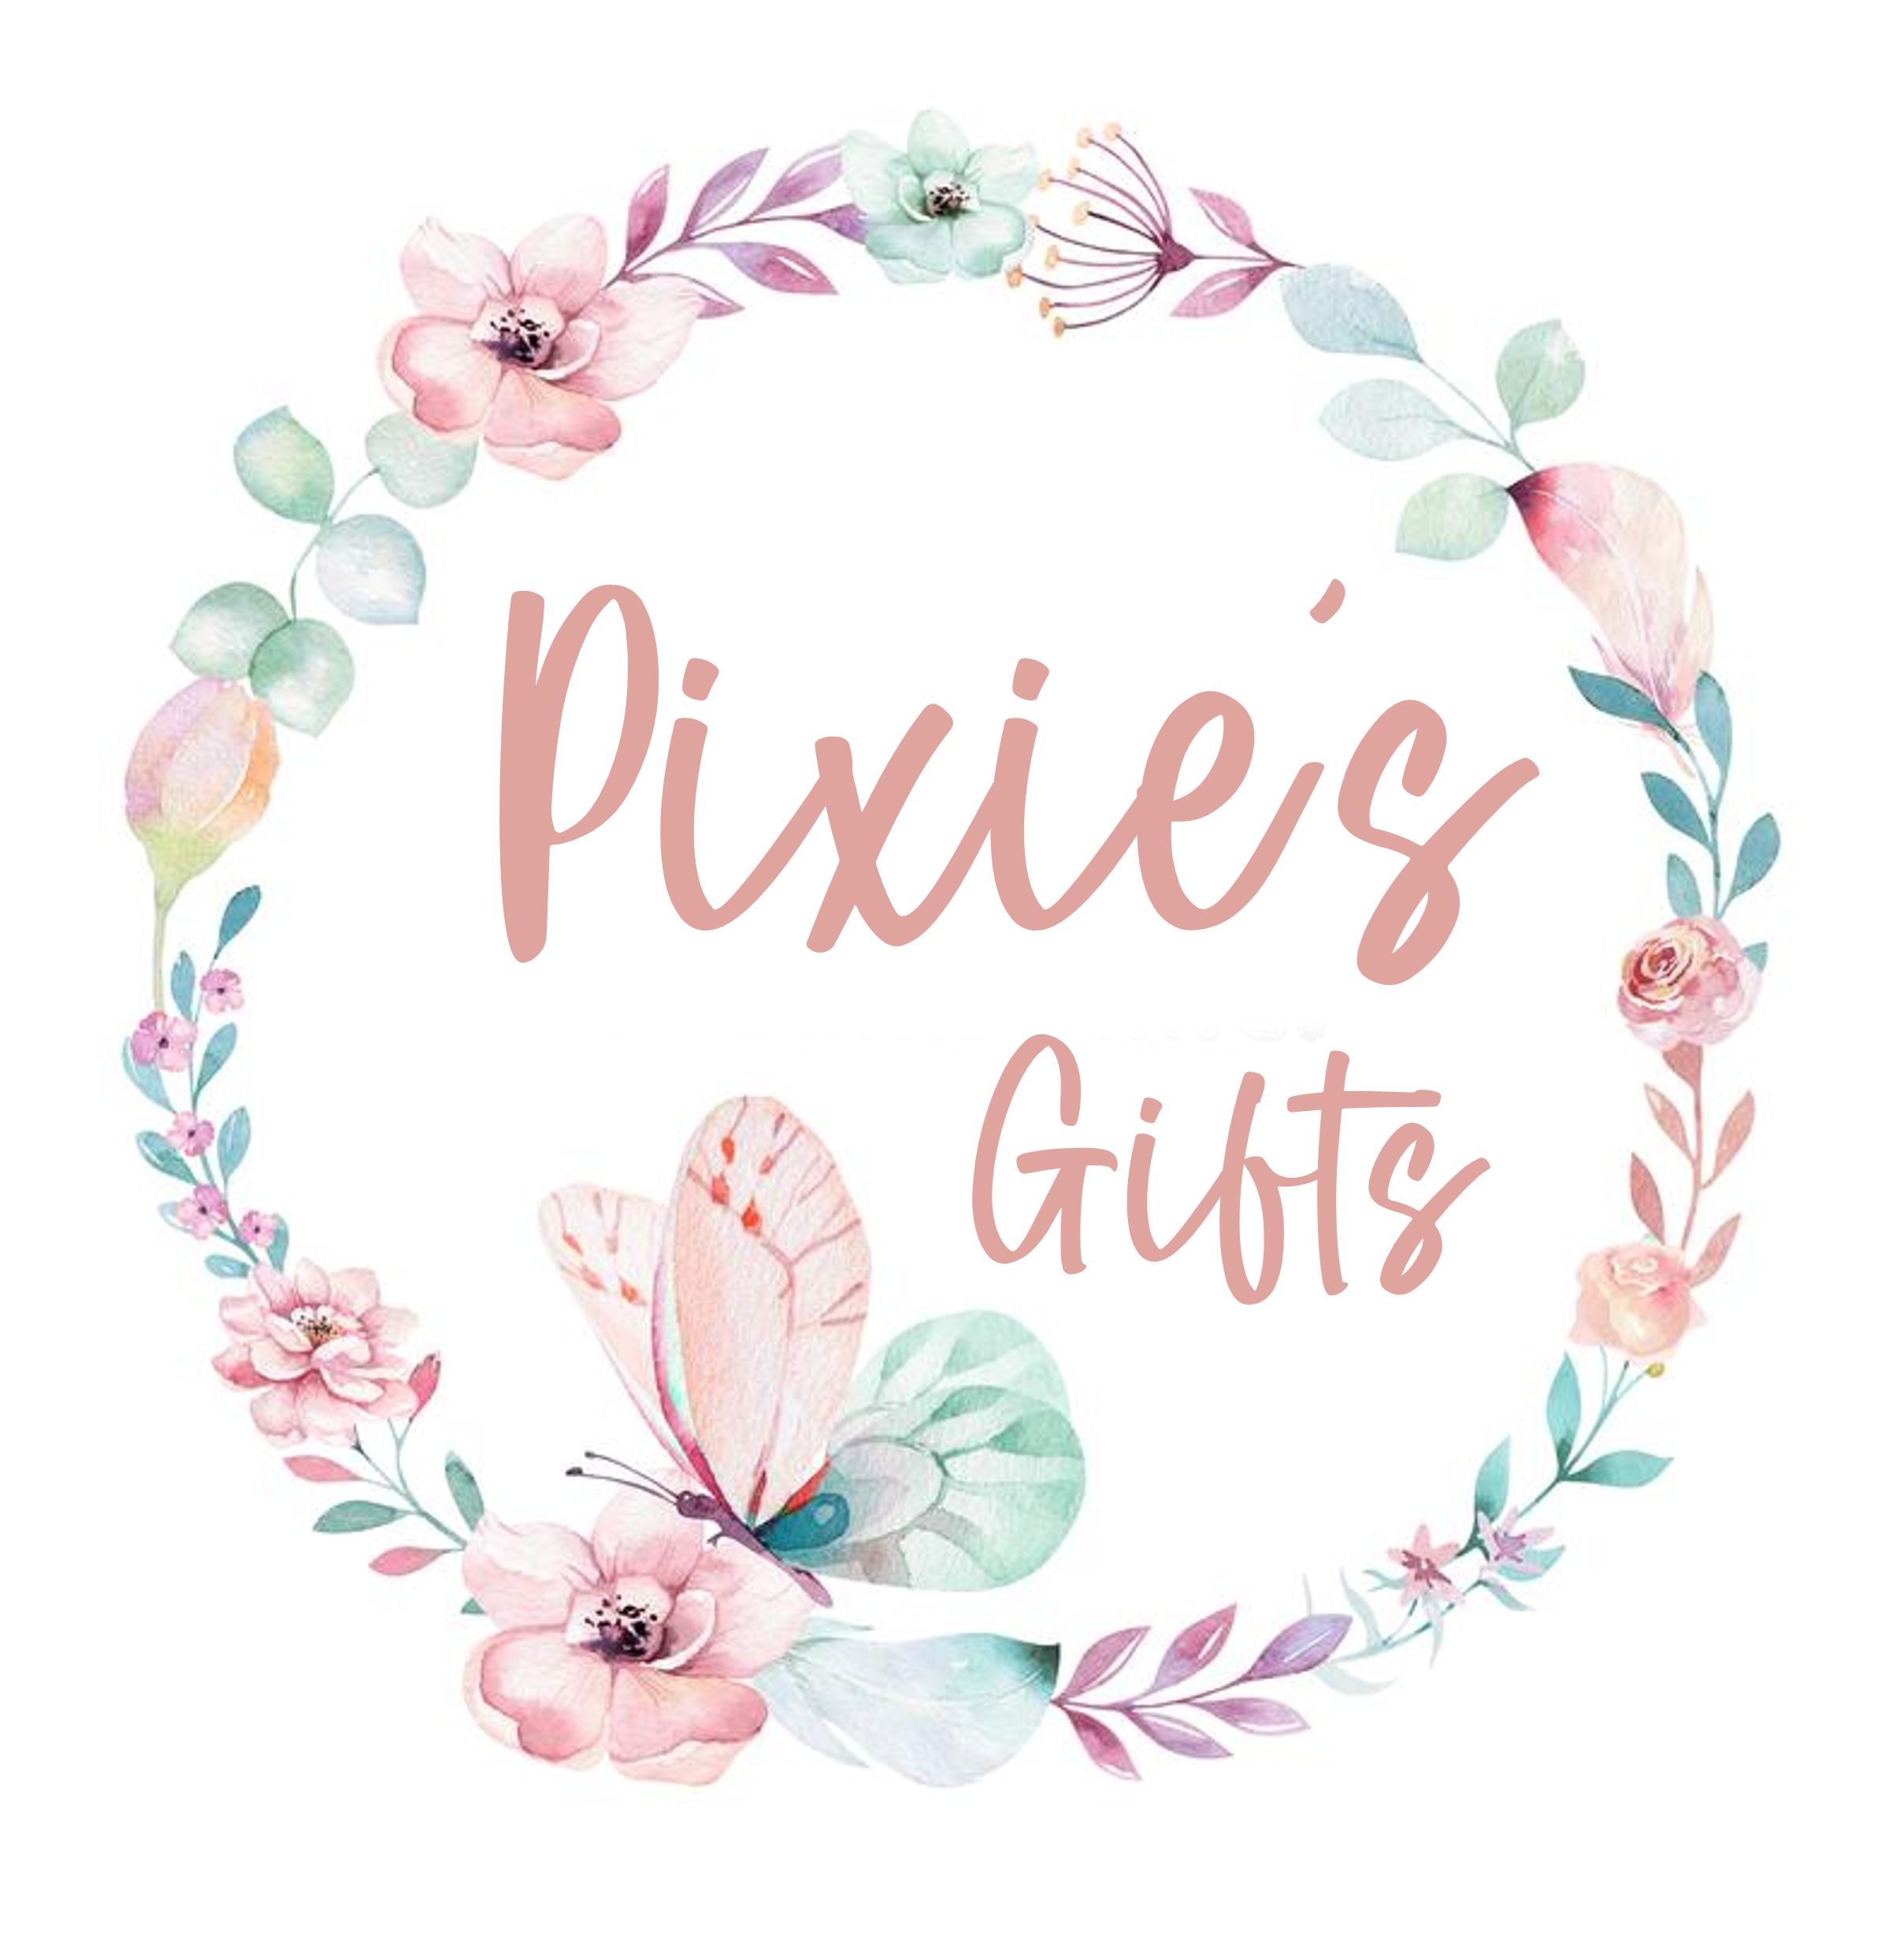 Pixies Gifts